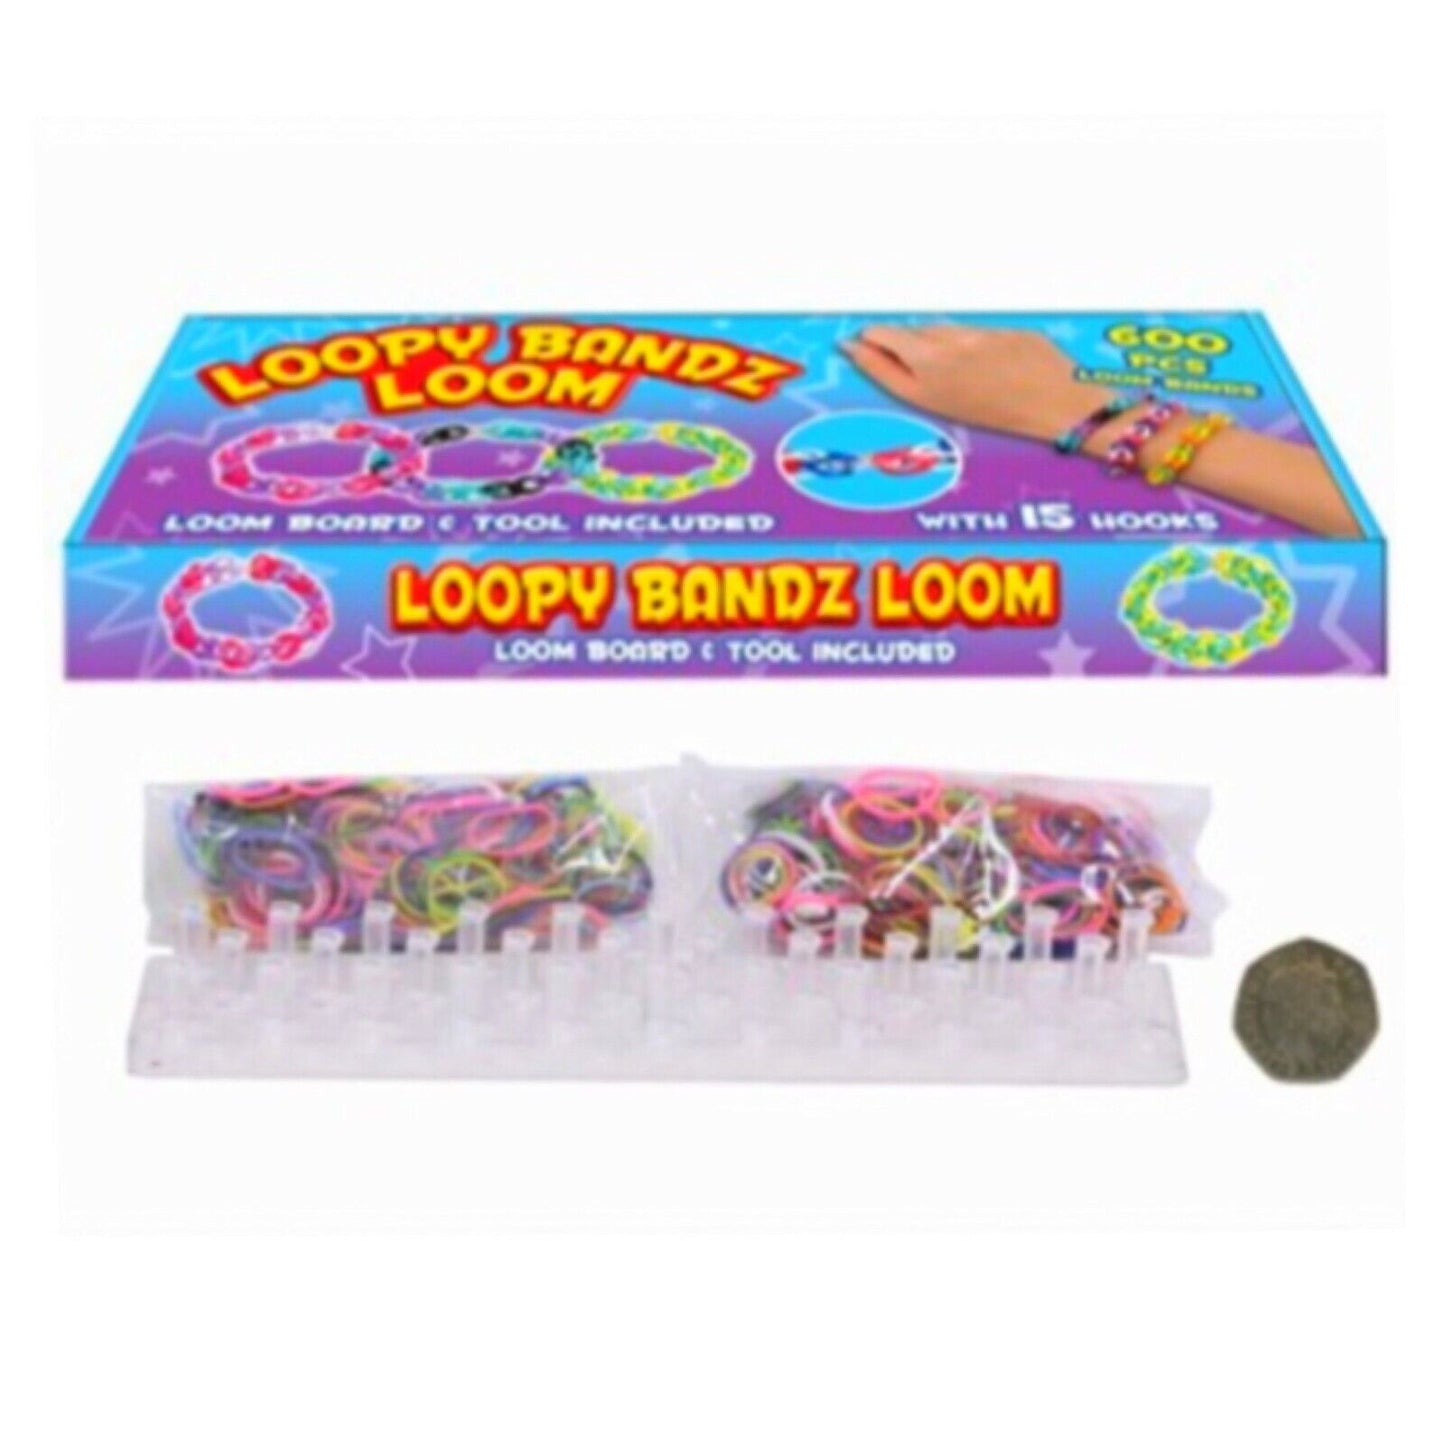 1200x Loopy Loom Bandz Complete DIY Kit with Magic Colour Changing Pony Beads